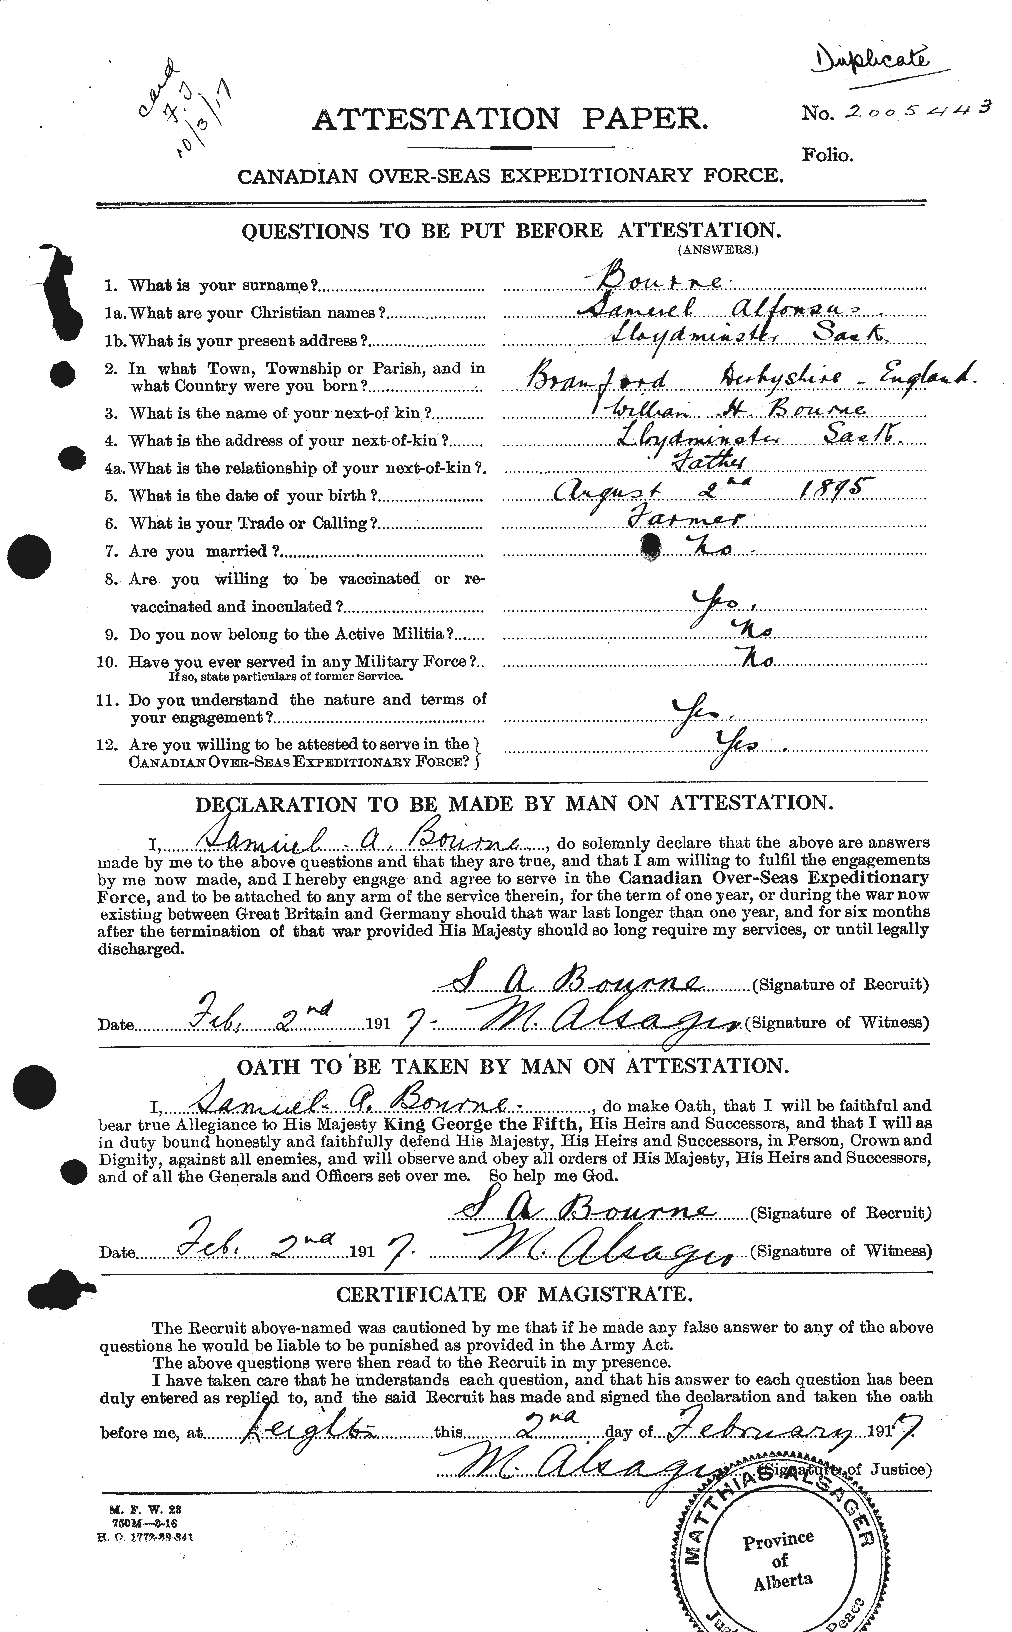 Personnel Records of the First World War - CEF 254147a